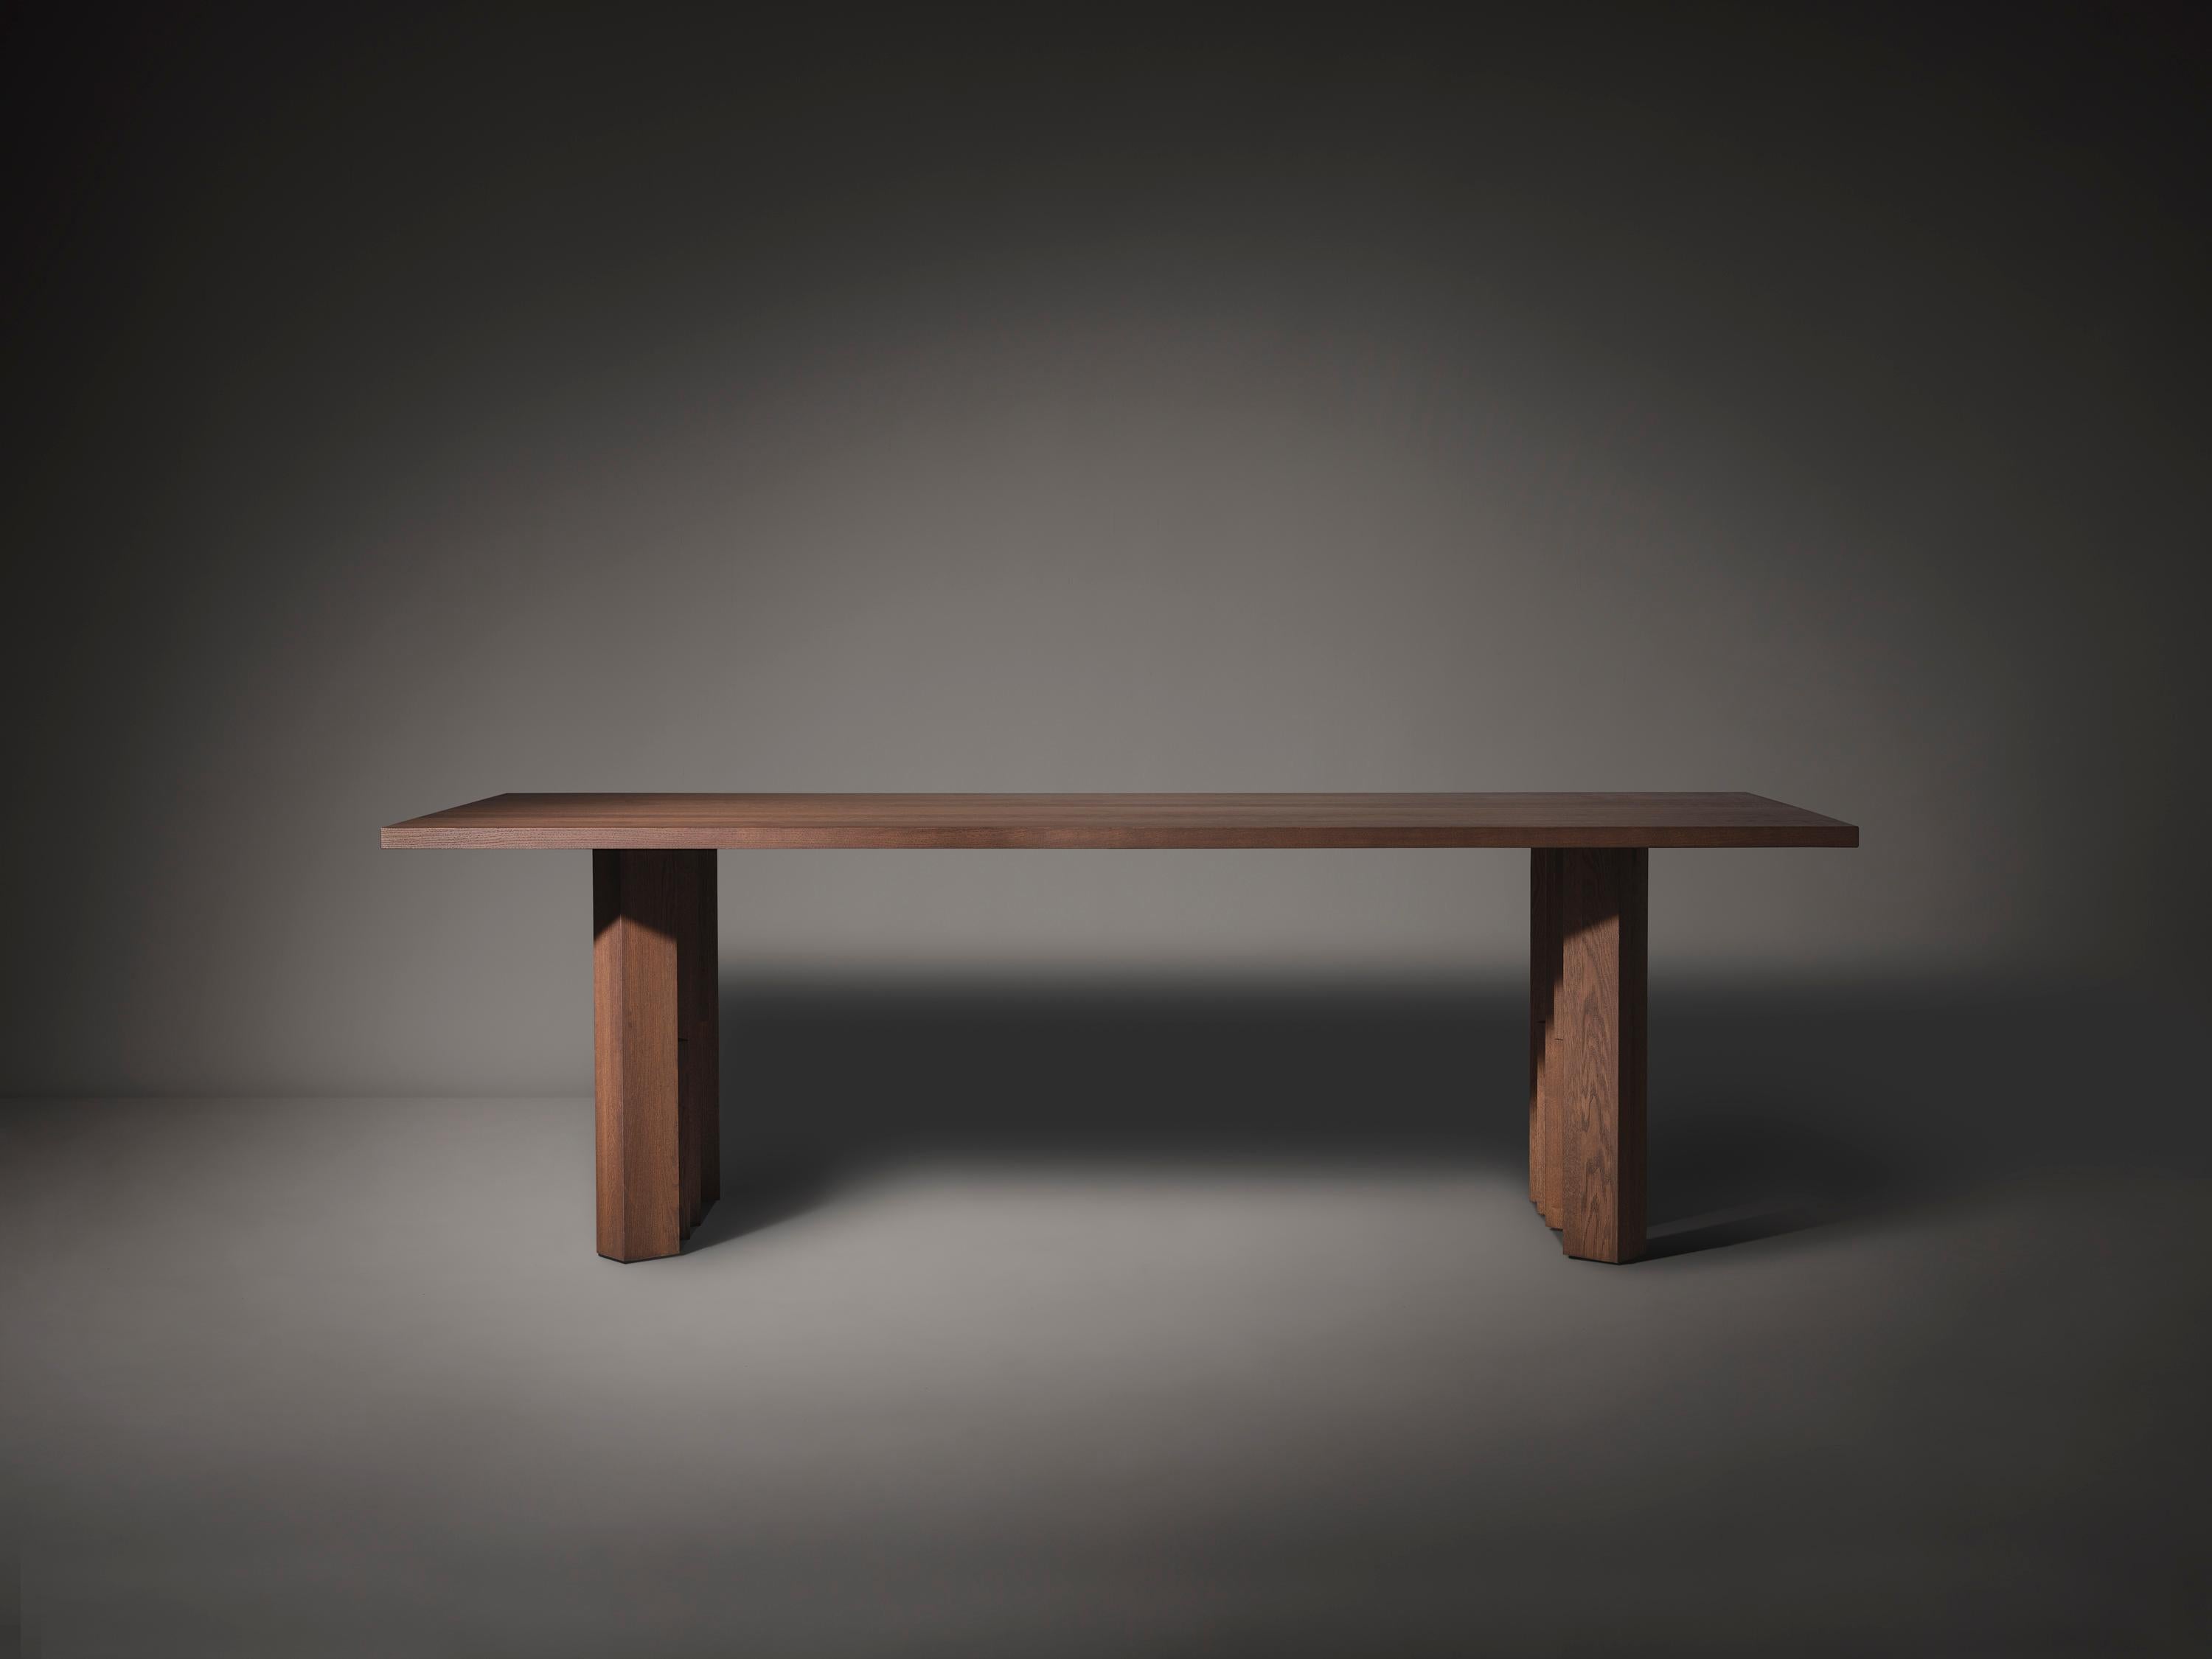 A rhythmic interplay of volumes and voids. The Fenestra table is inspired by Brick Expressionism, the architectural movement visible in Amsterdam’s ‘South Plan’ area - the city development plan designed by H.P. Berlage in 1915. The table is designed